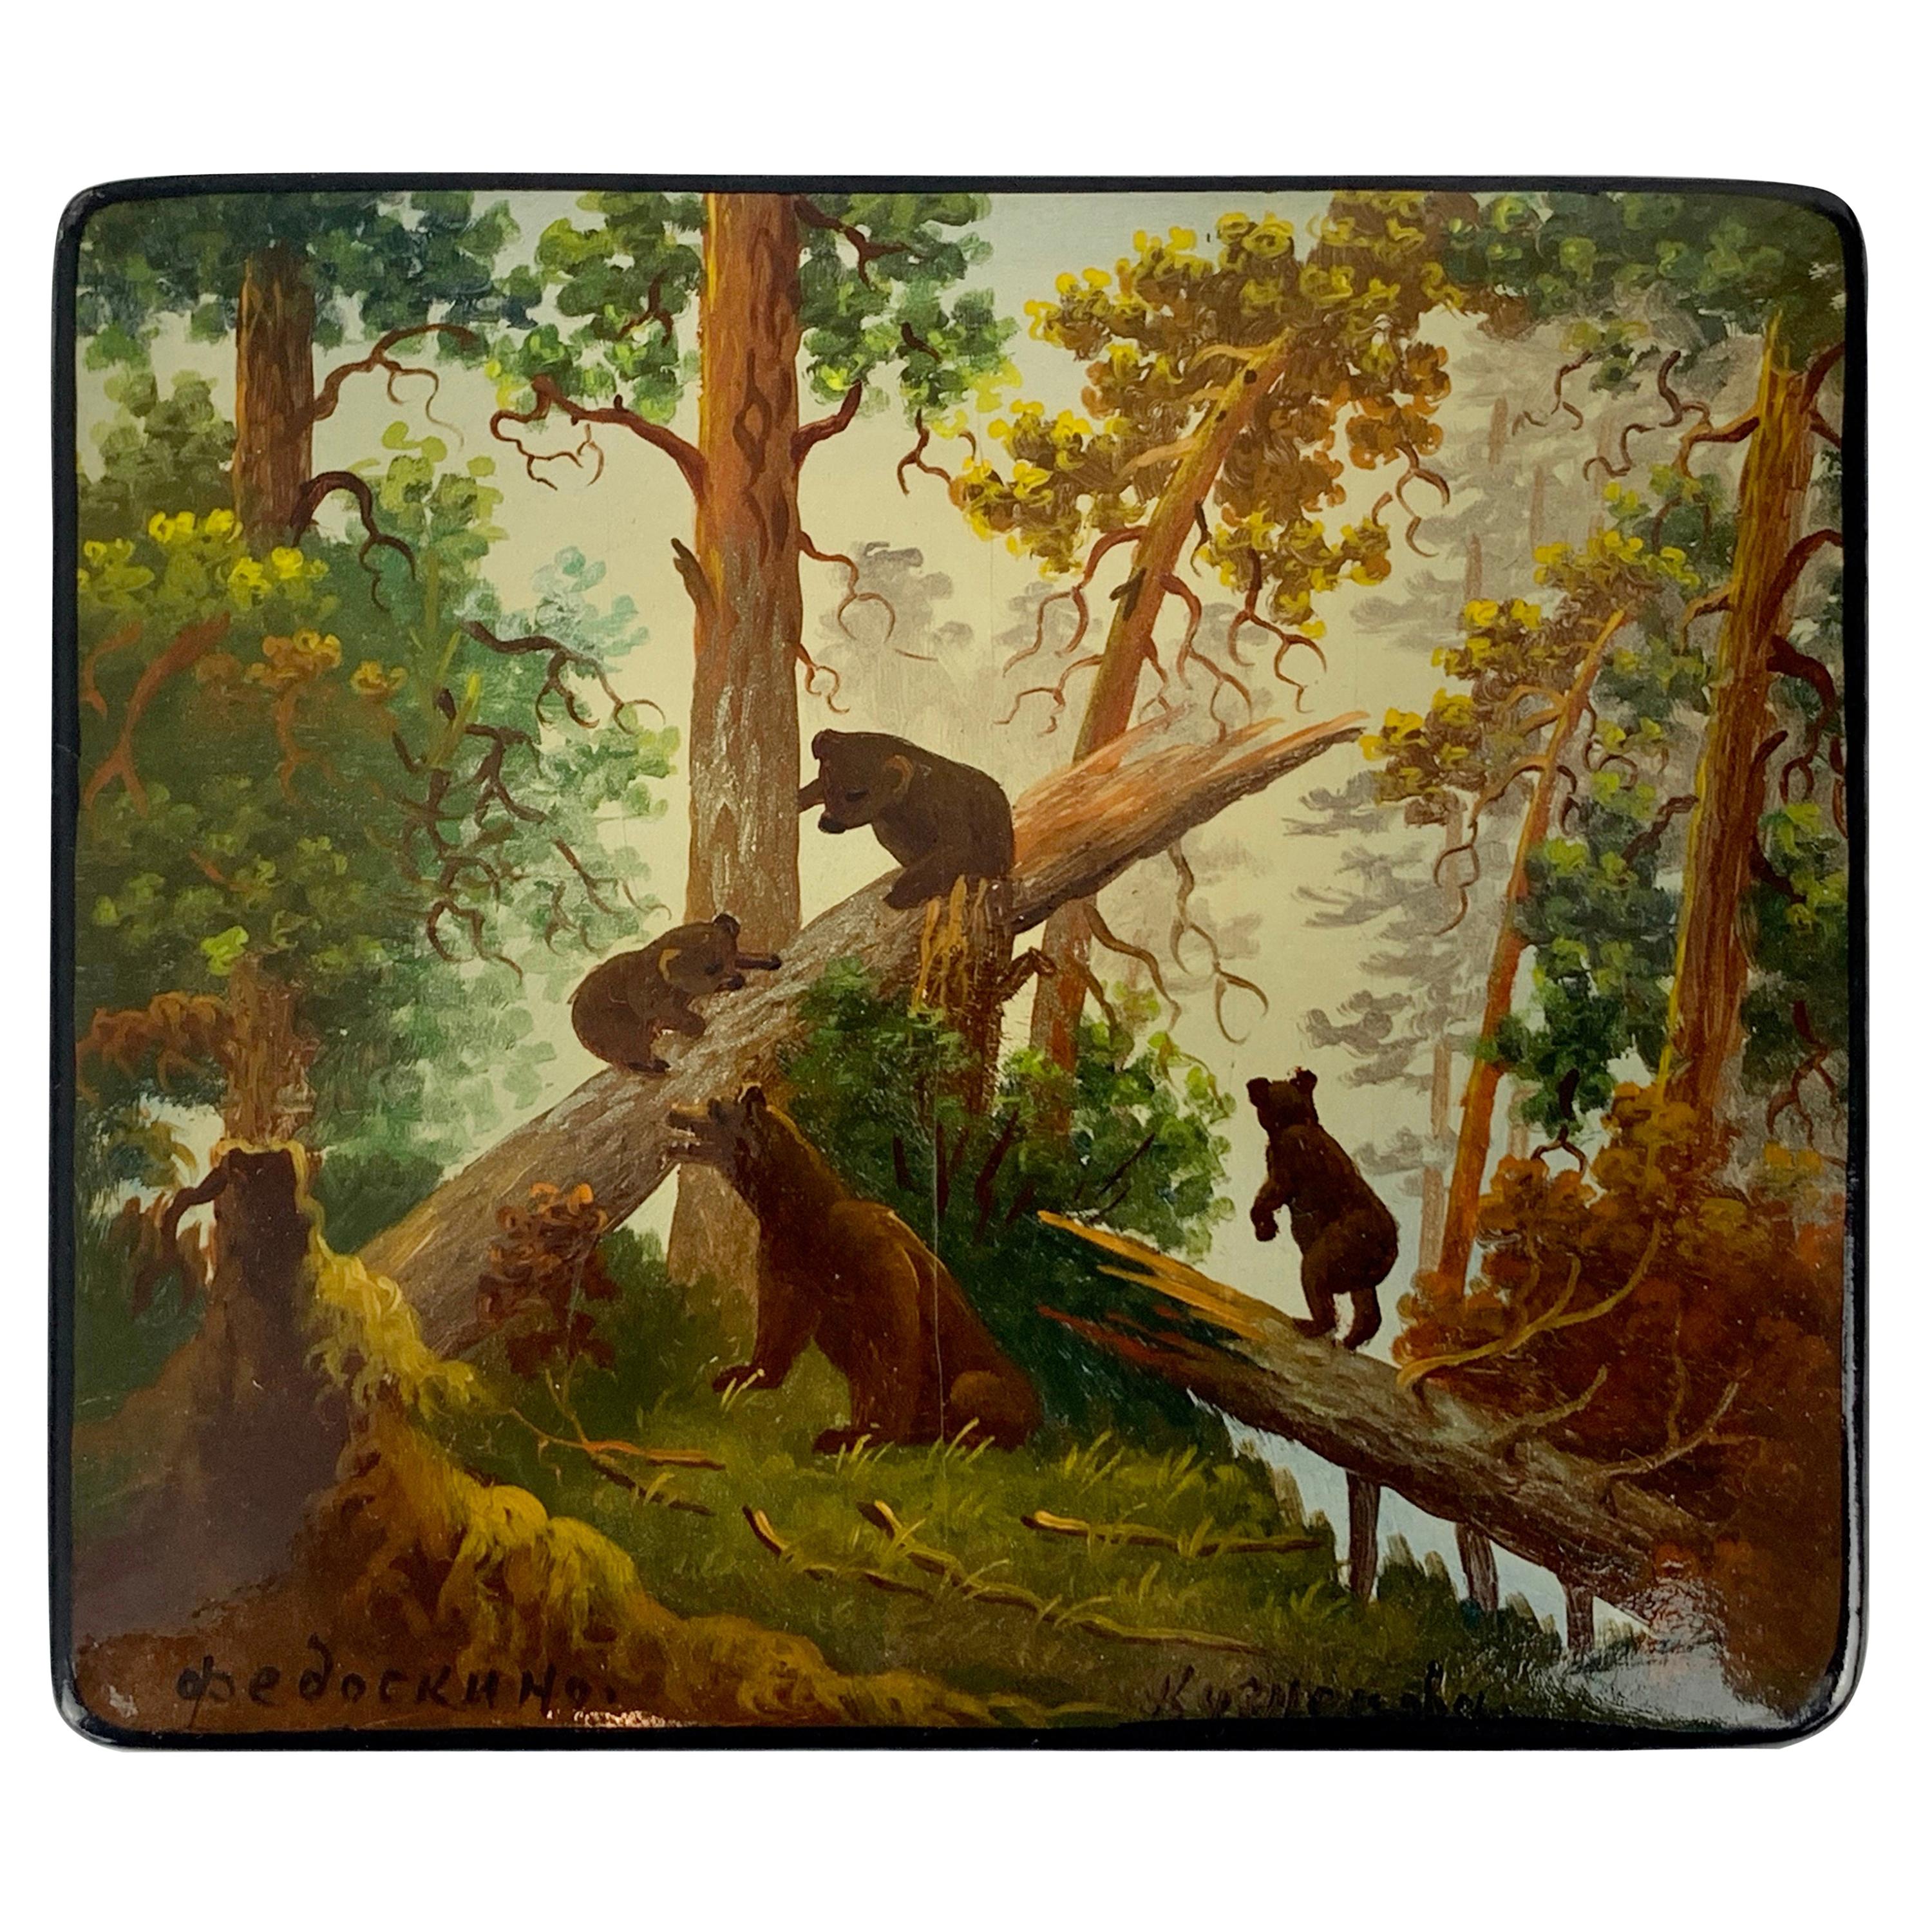 Russian Lacquer Box "Morning in the Woods" after a Painting by Ivan Shishkin